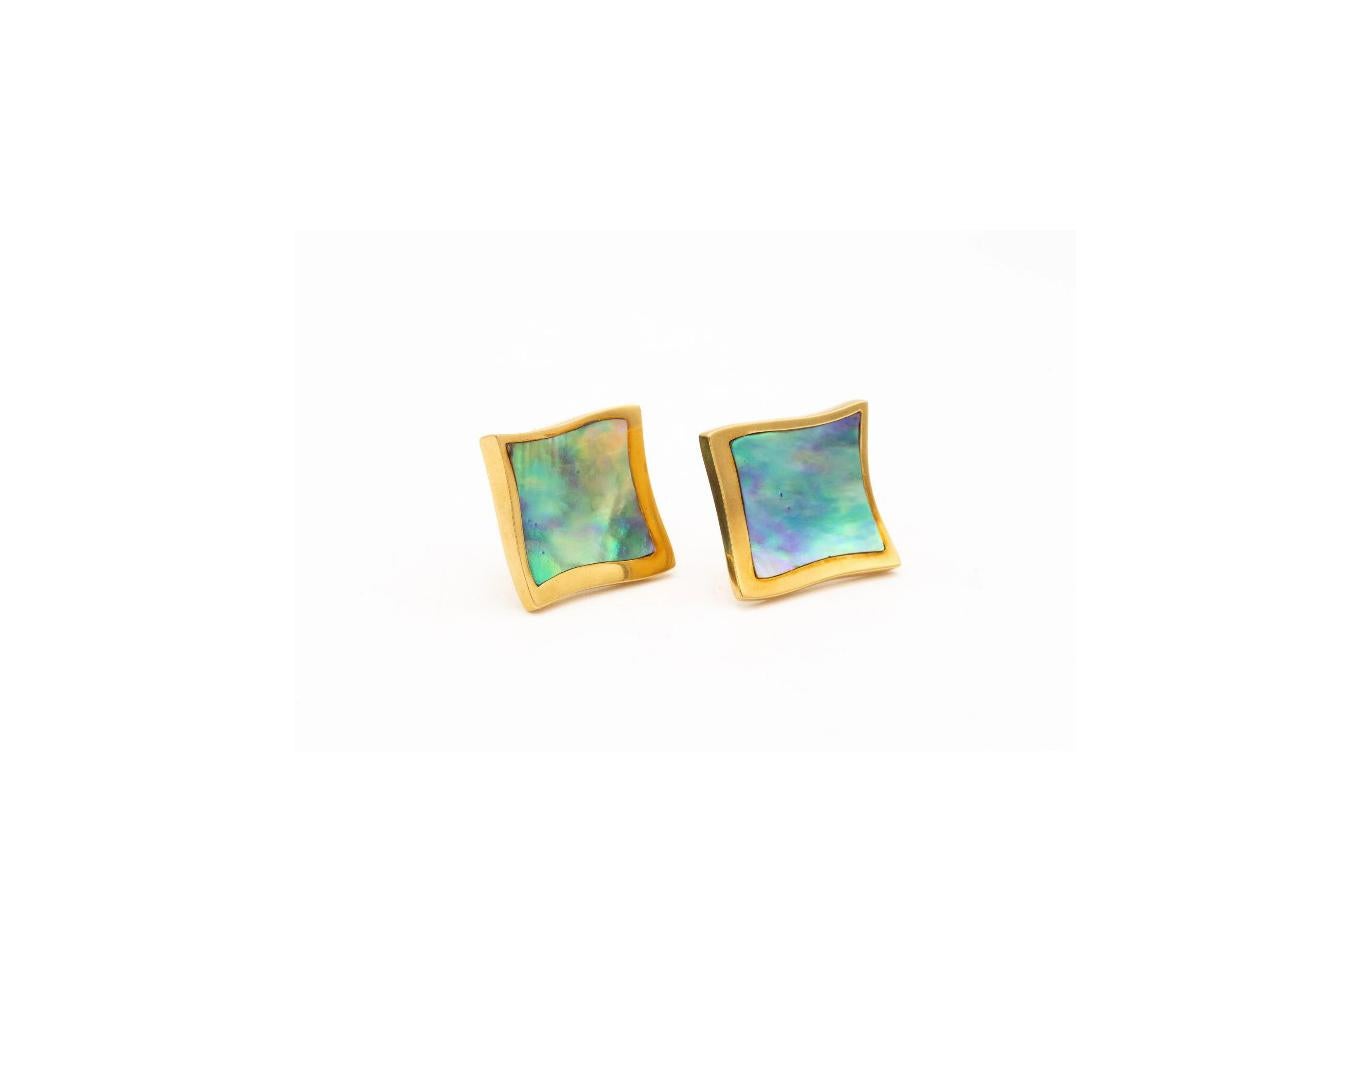 Retro Angela Cummings 1980 Rare Squared Earrings 18Kt Yellow Gold with Abalone Shell For Sale